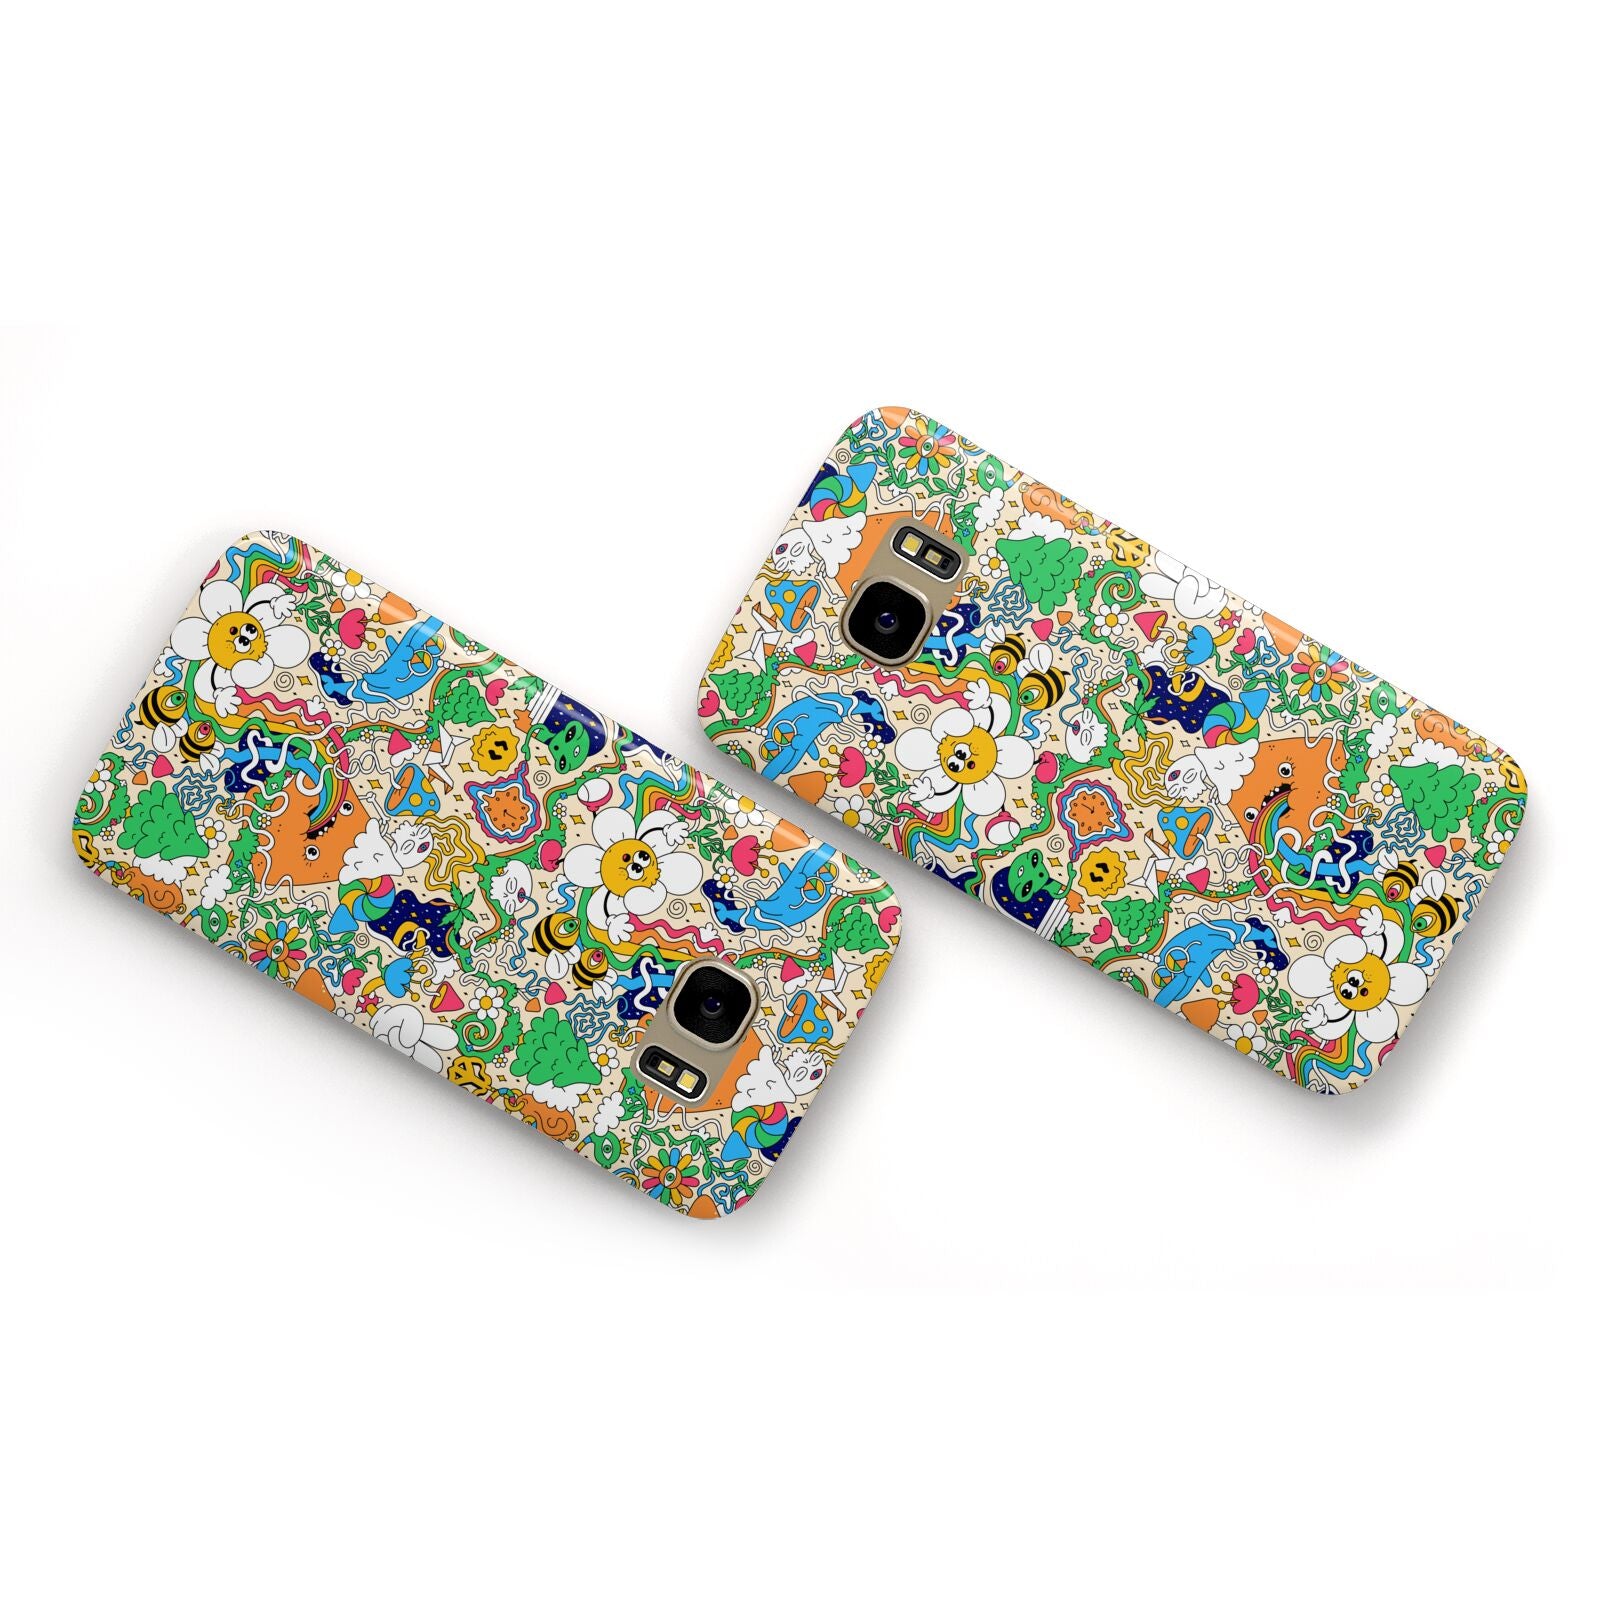 Psychedelic Trippy Samsung Galaxy Case Flat Overview